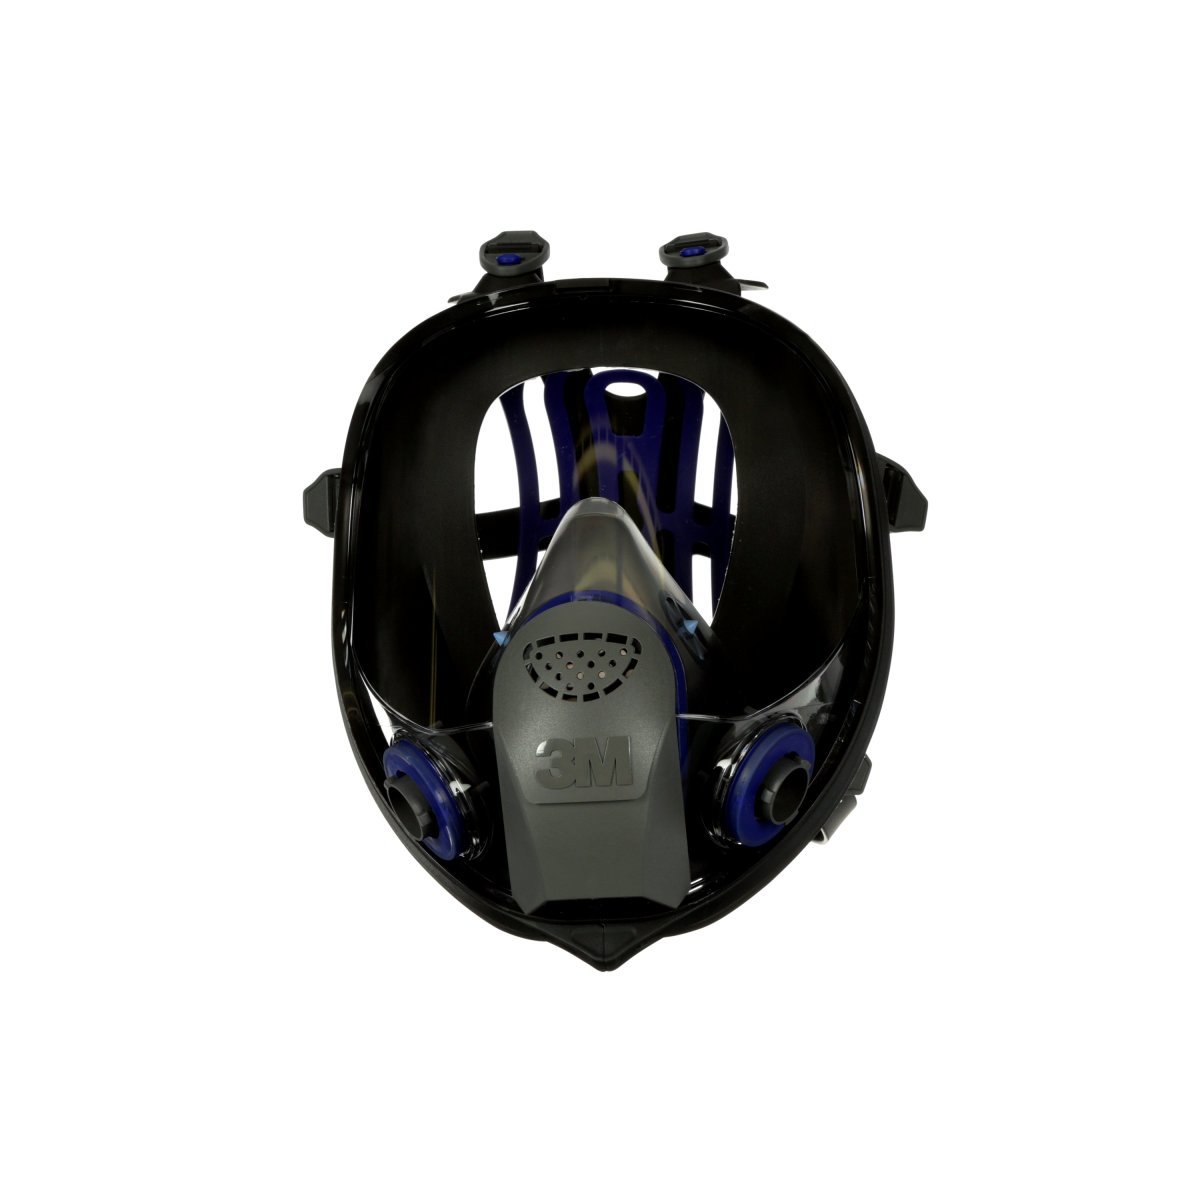 3M™ Medium FF-402 Series Full Face Ultimate FX Air Purifying Respirator With 6 Point Harness (Availability restrictions apply.)